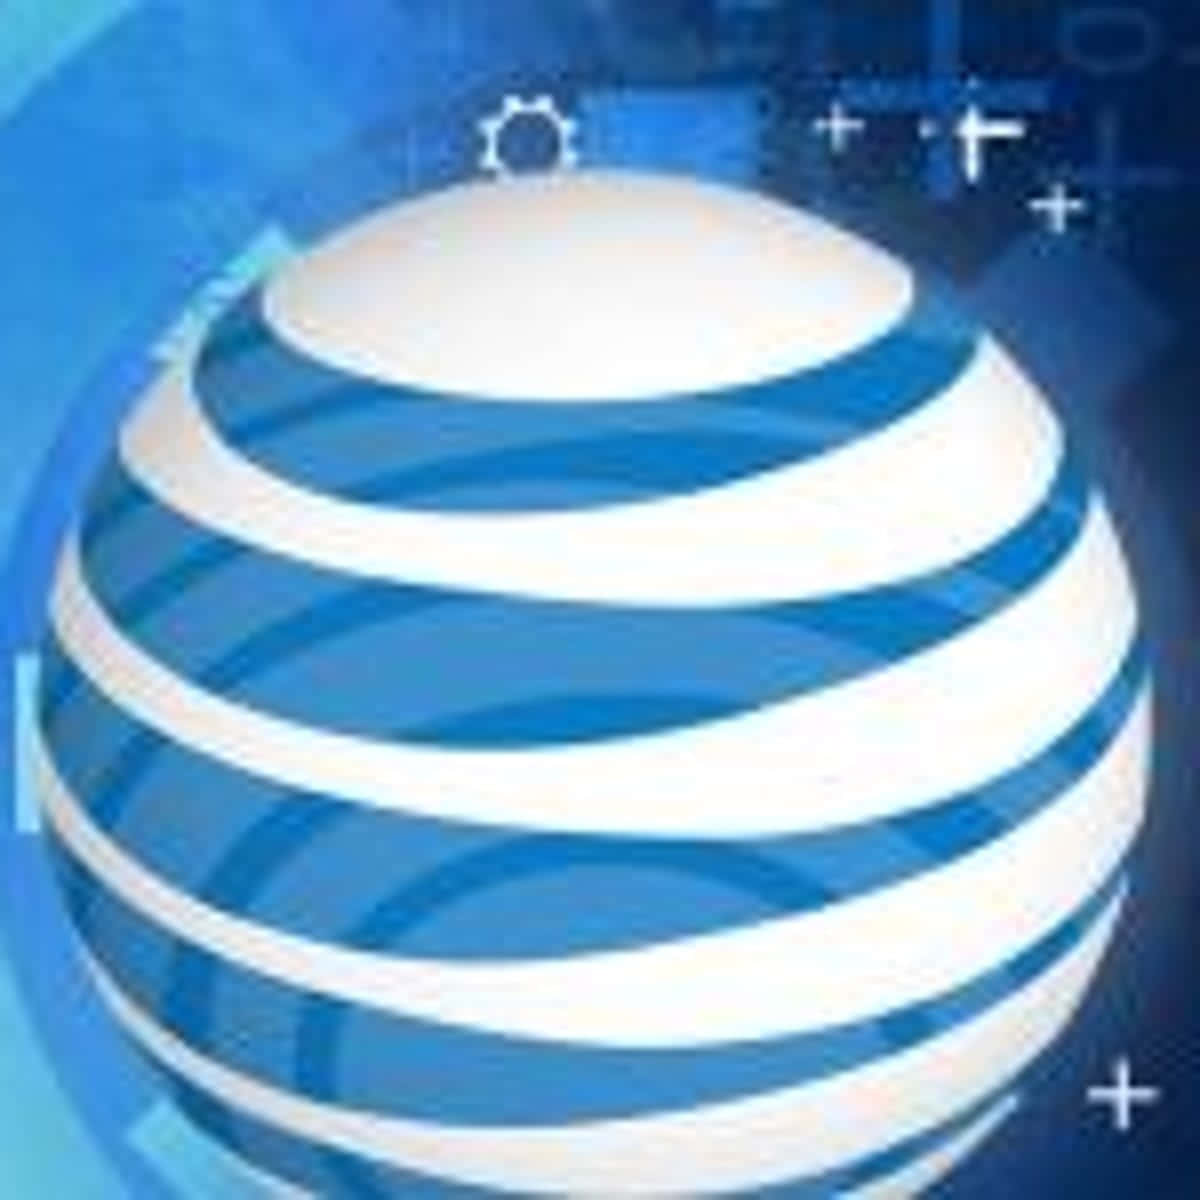 At&t 's Logo Is Shown On A Blue Background Wallpaper